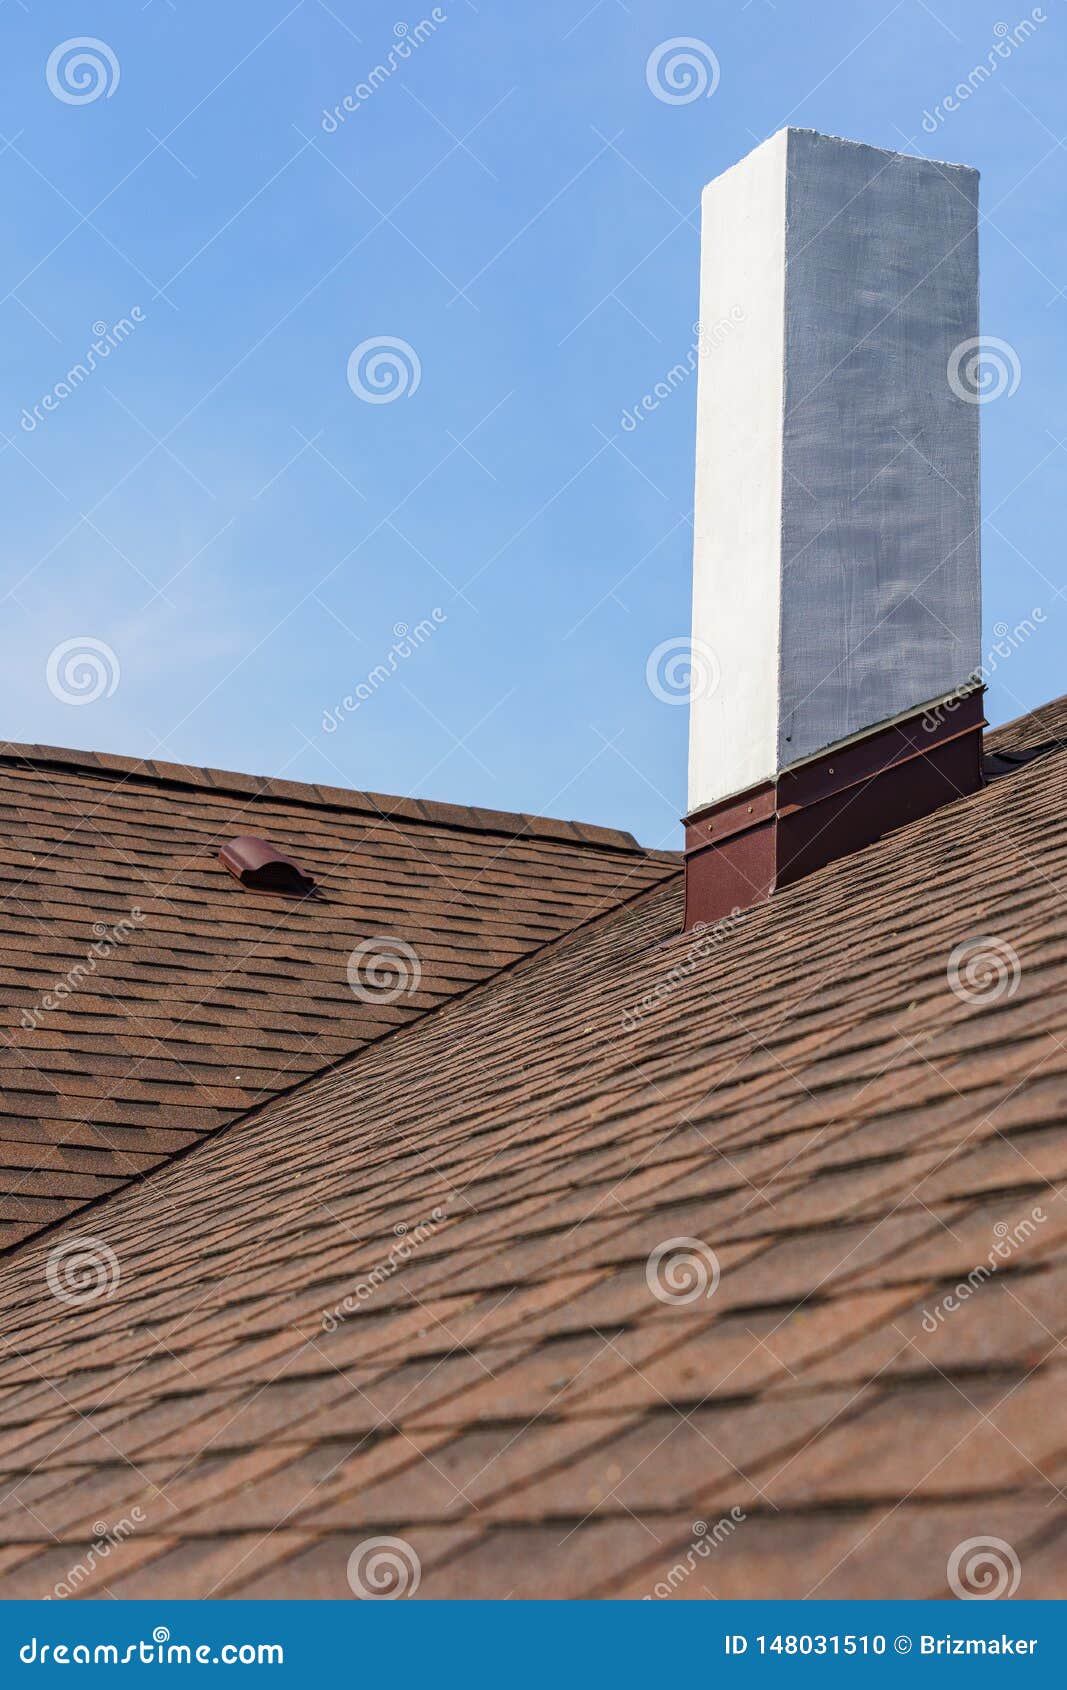 Asphalt Tile Roof With Chimney On New Home Under Construction Stock